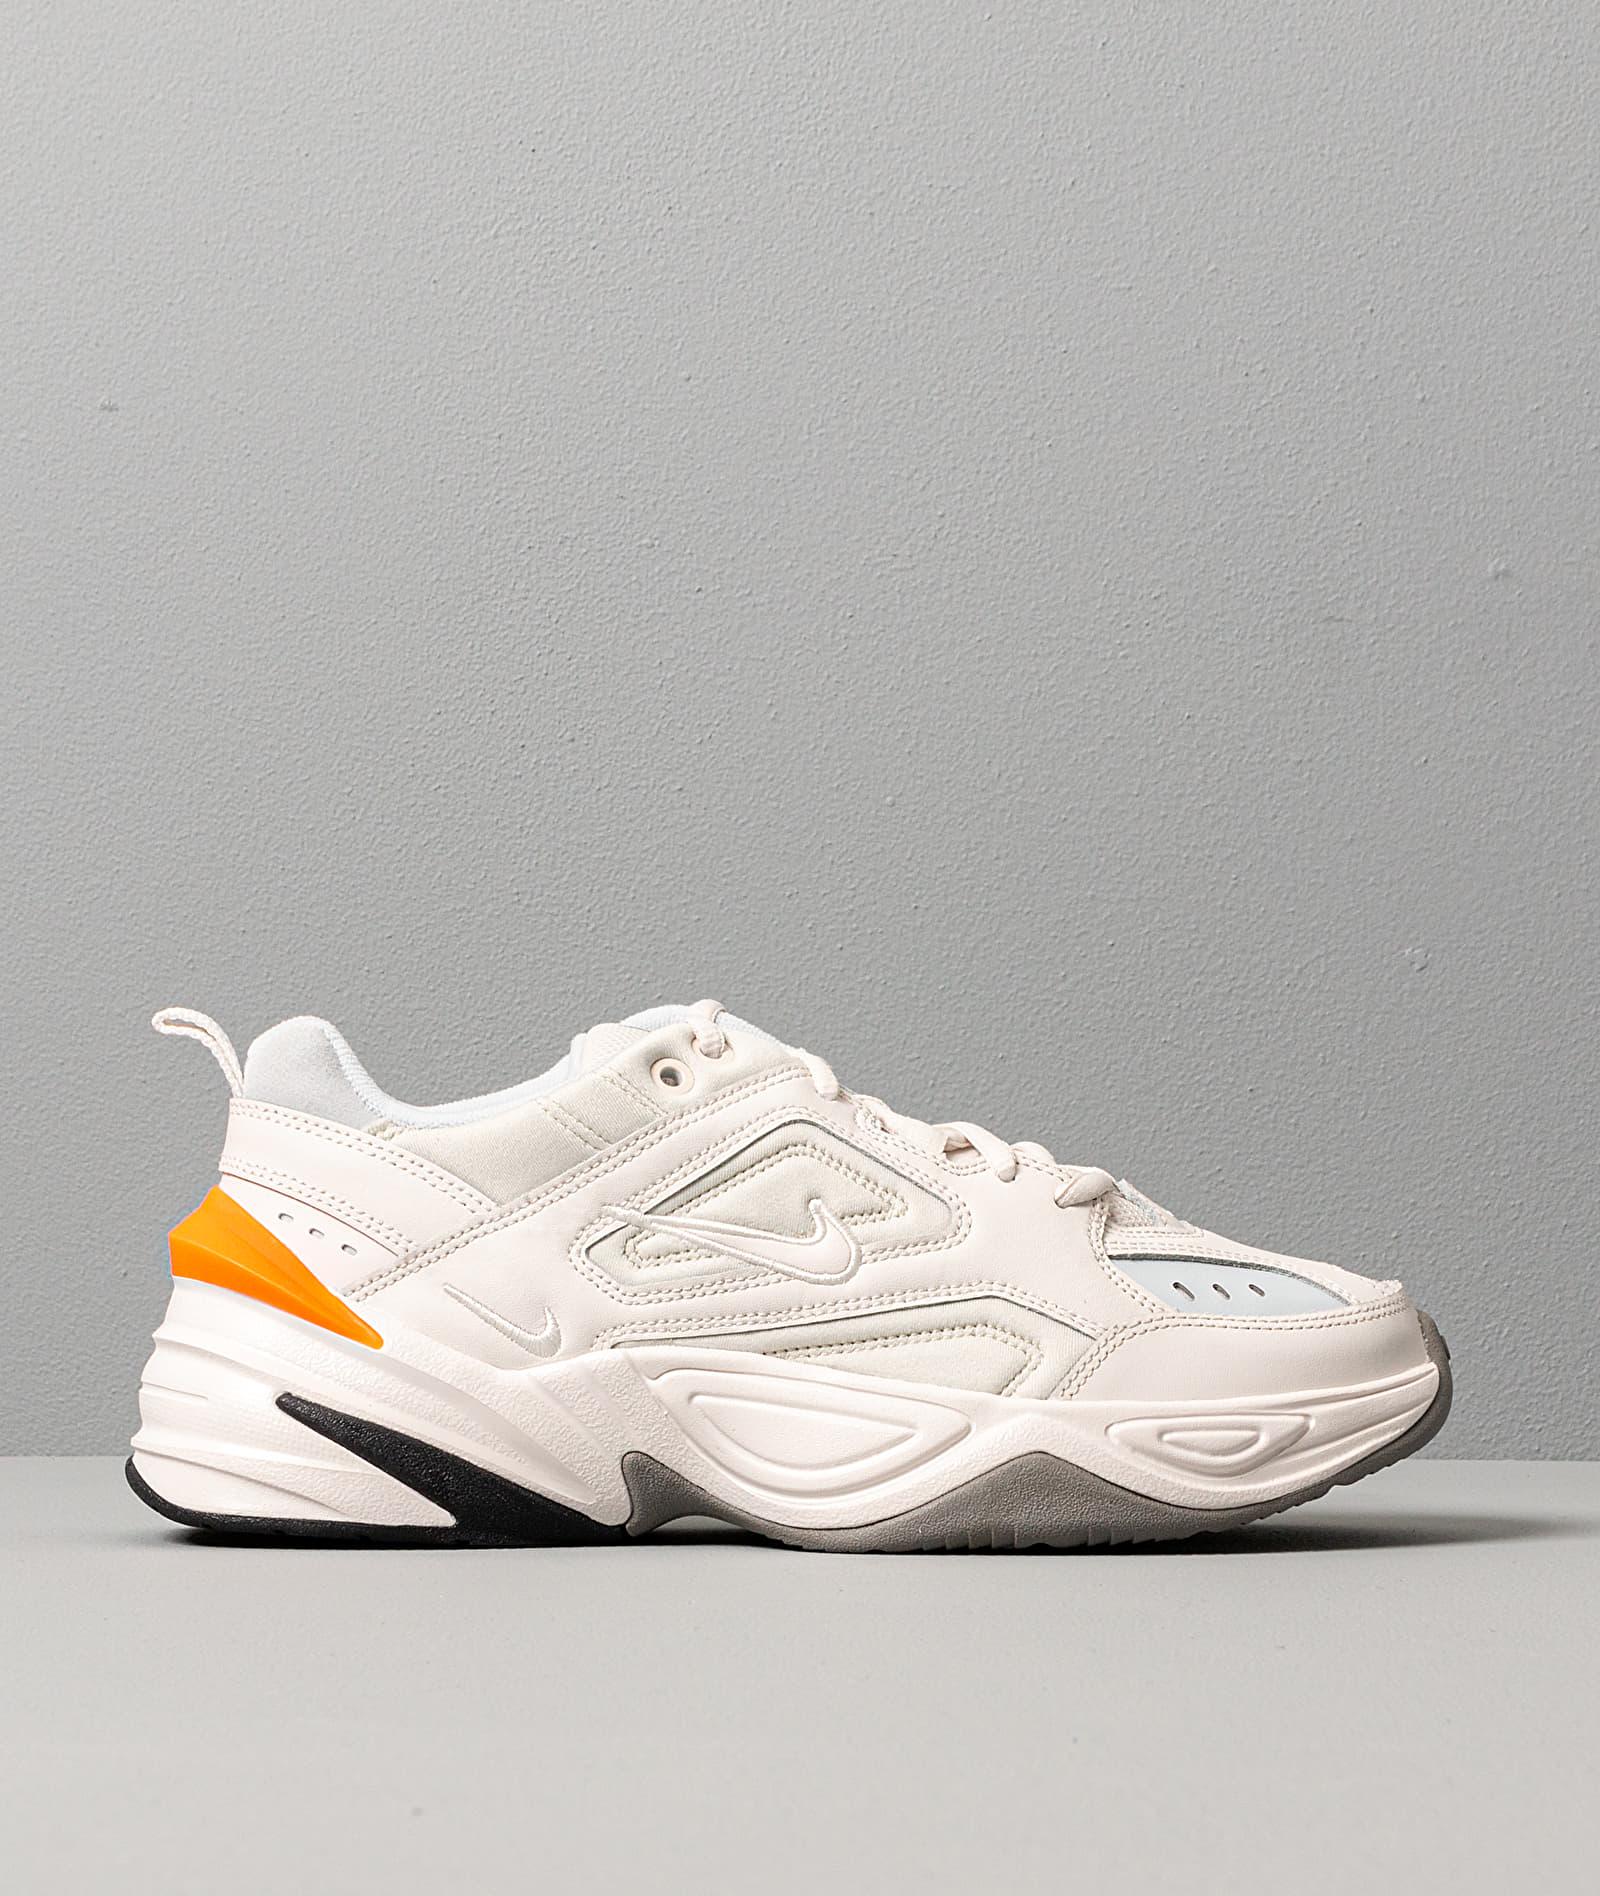 Nike M2k Tekno Leather And Neoprene Sneakers in White - Lyst